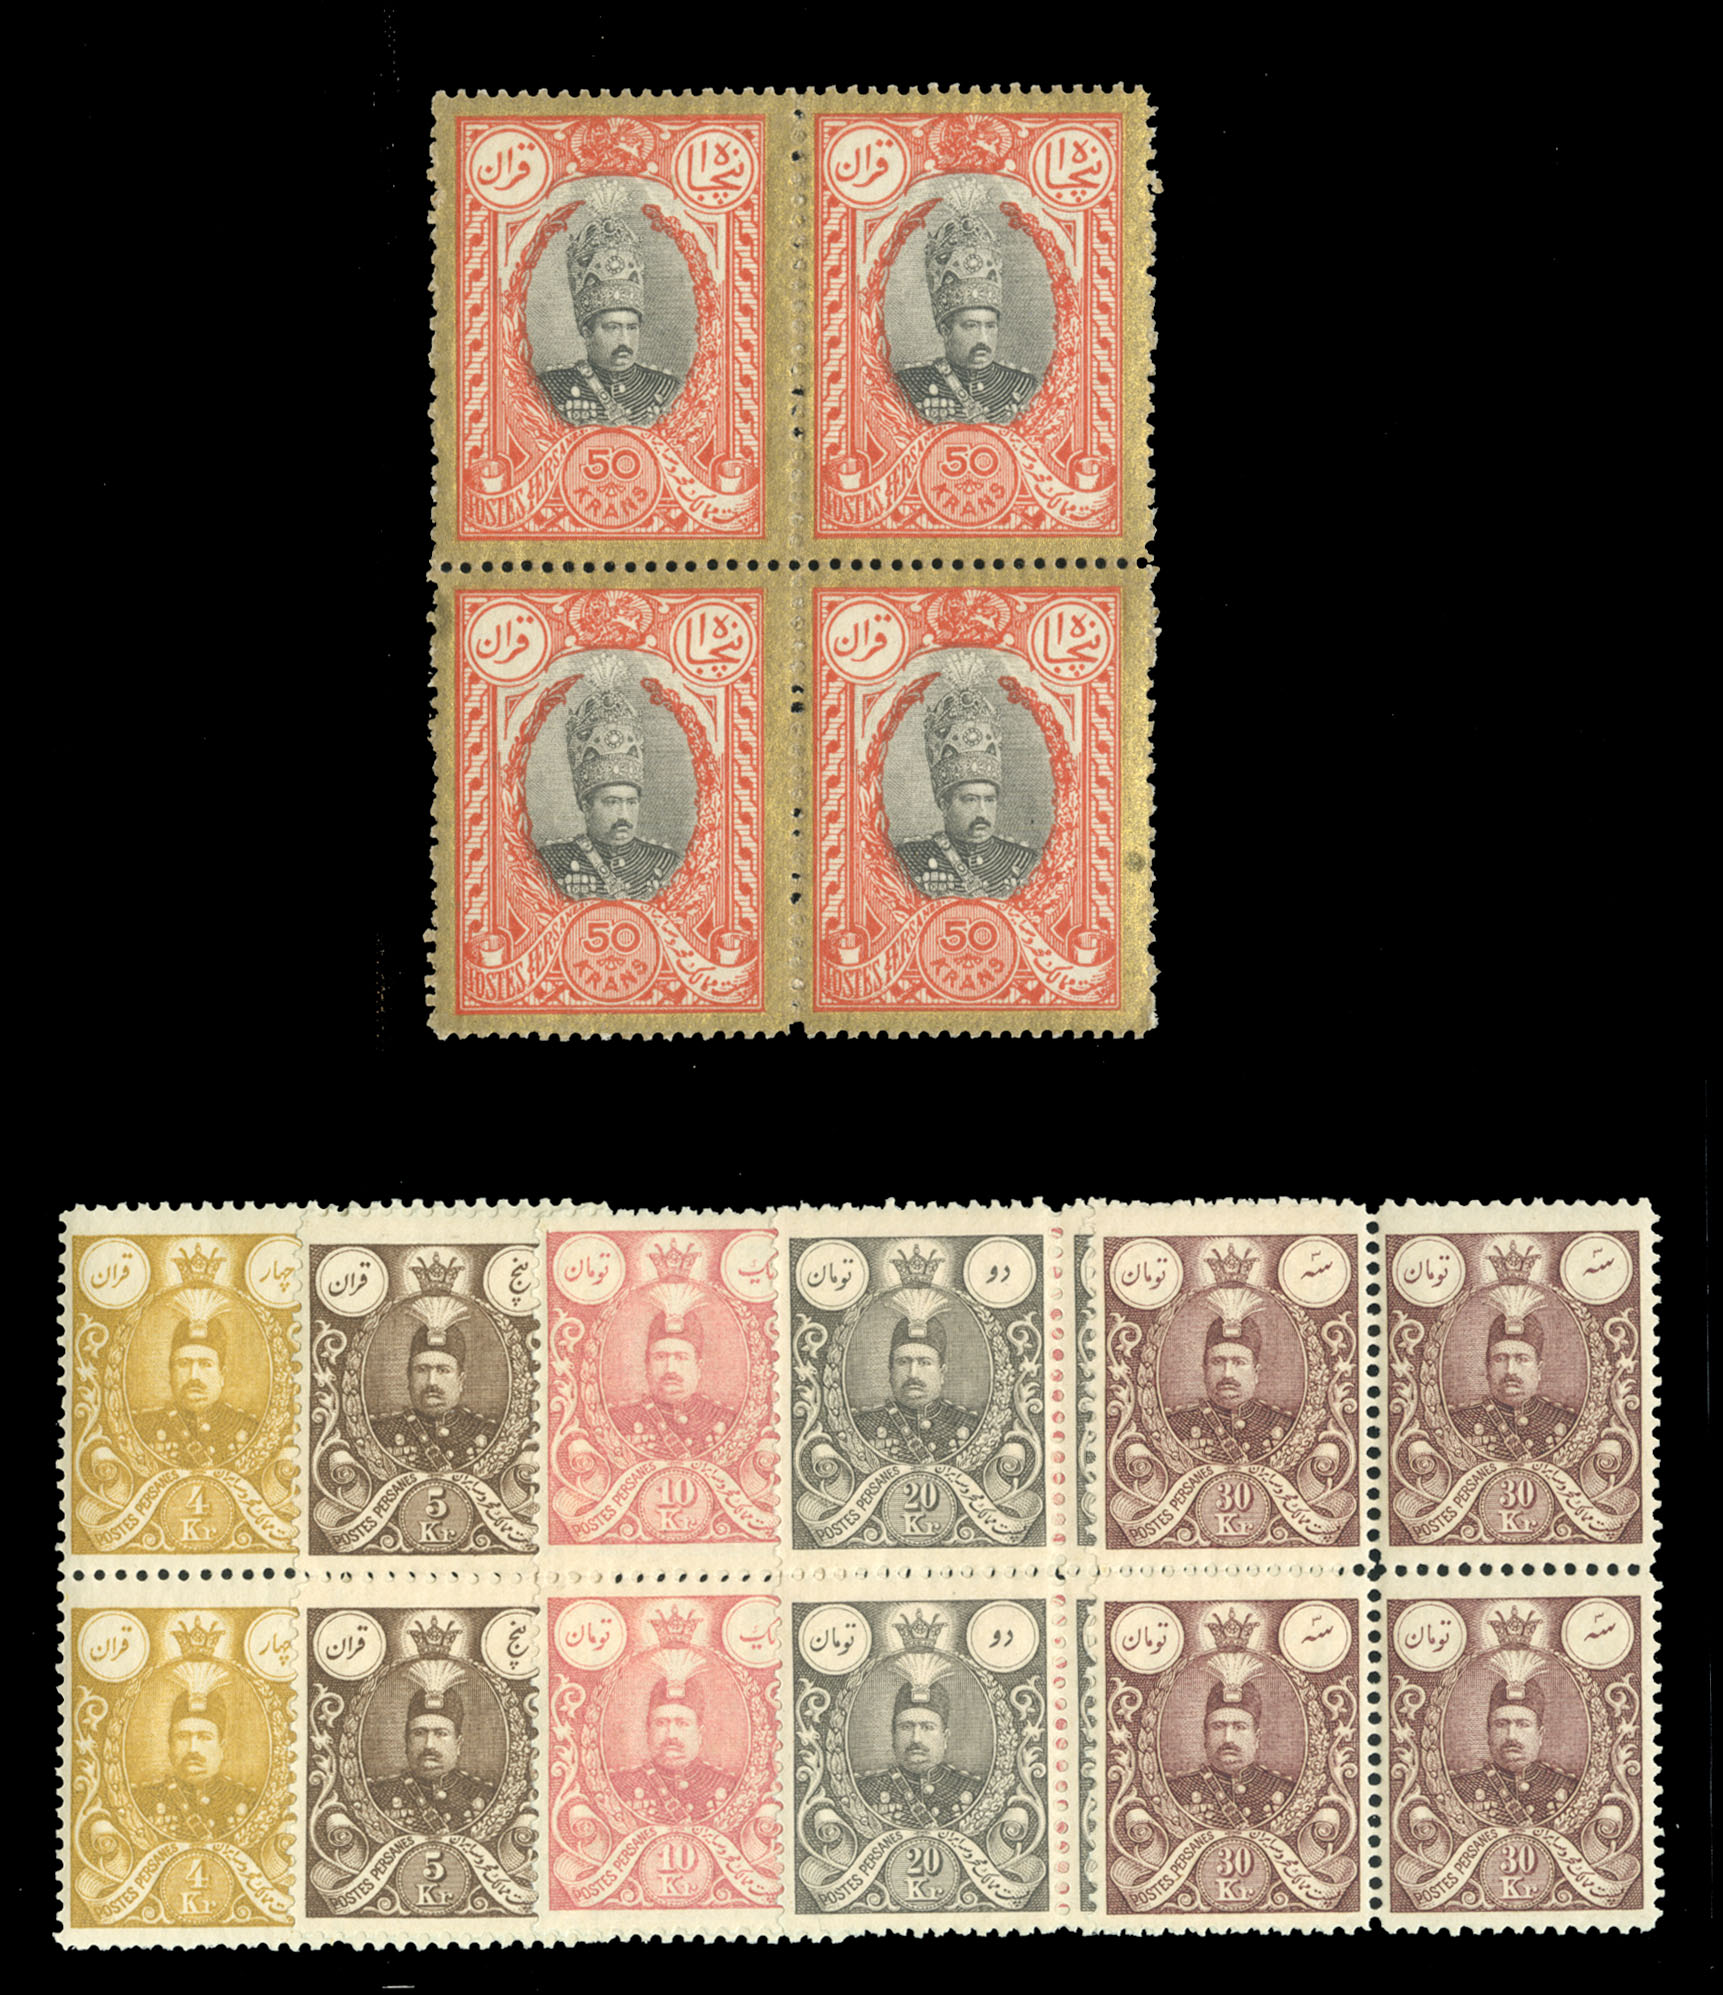 Lot 969 - NETHERLANDS COLONIES Netherlands Indies Japanese Occupation  -  Cherrystone Auctions U.S. & Worldwide Stamps & Postal History